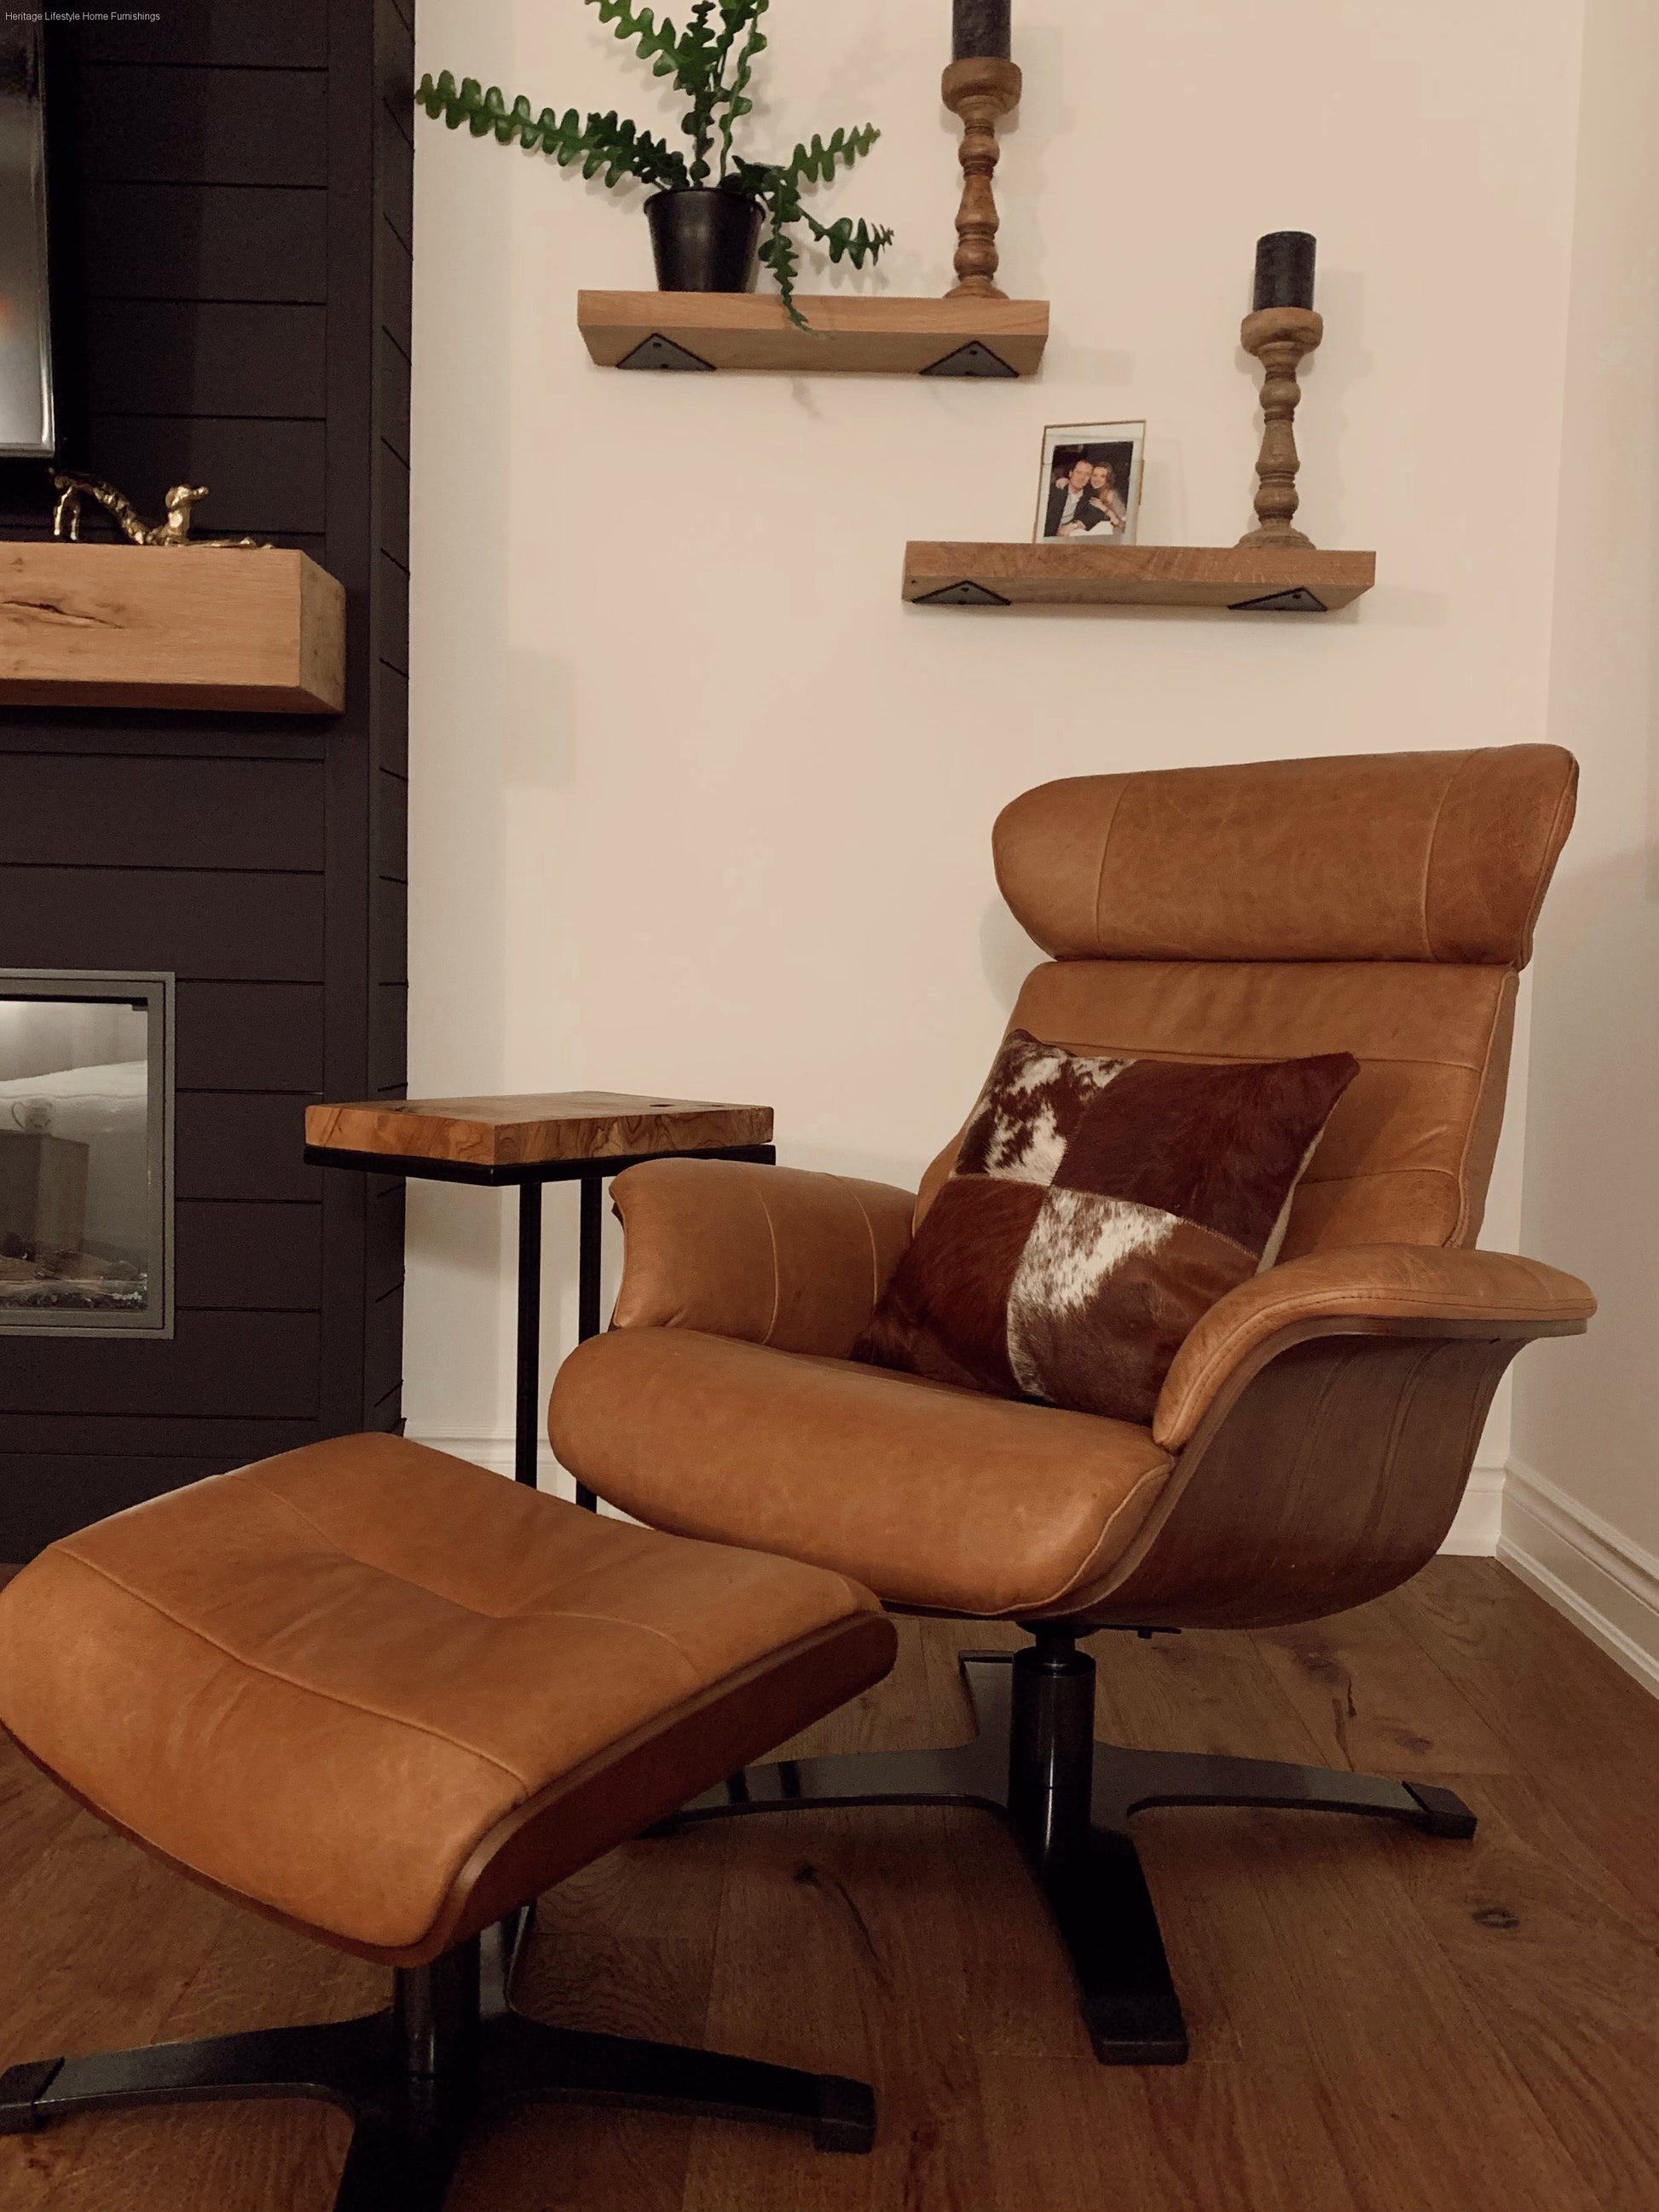 HLHF A928-1(2A)+0 Leather Lounge Chair & Ottoman - Whiskey Accent Chairs Furniture Store Burlington Ontario Near Me 